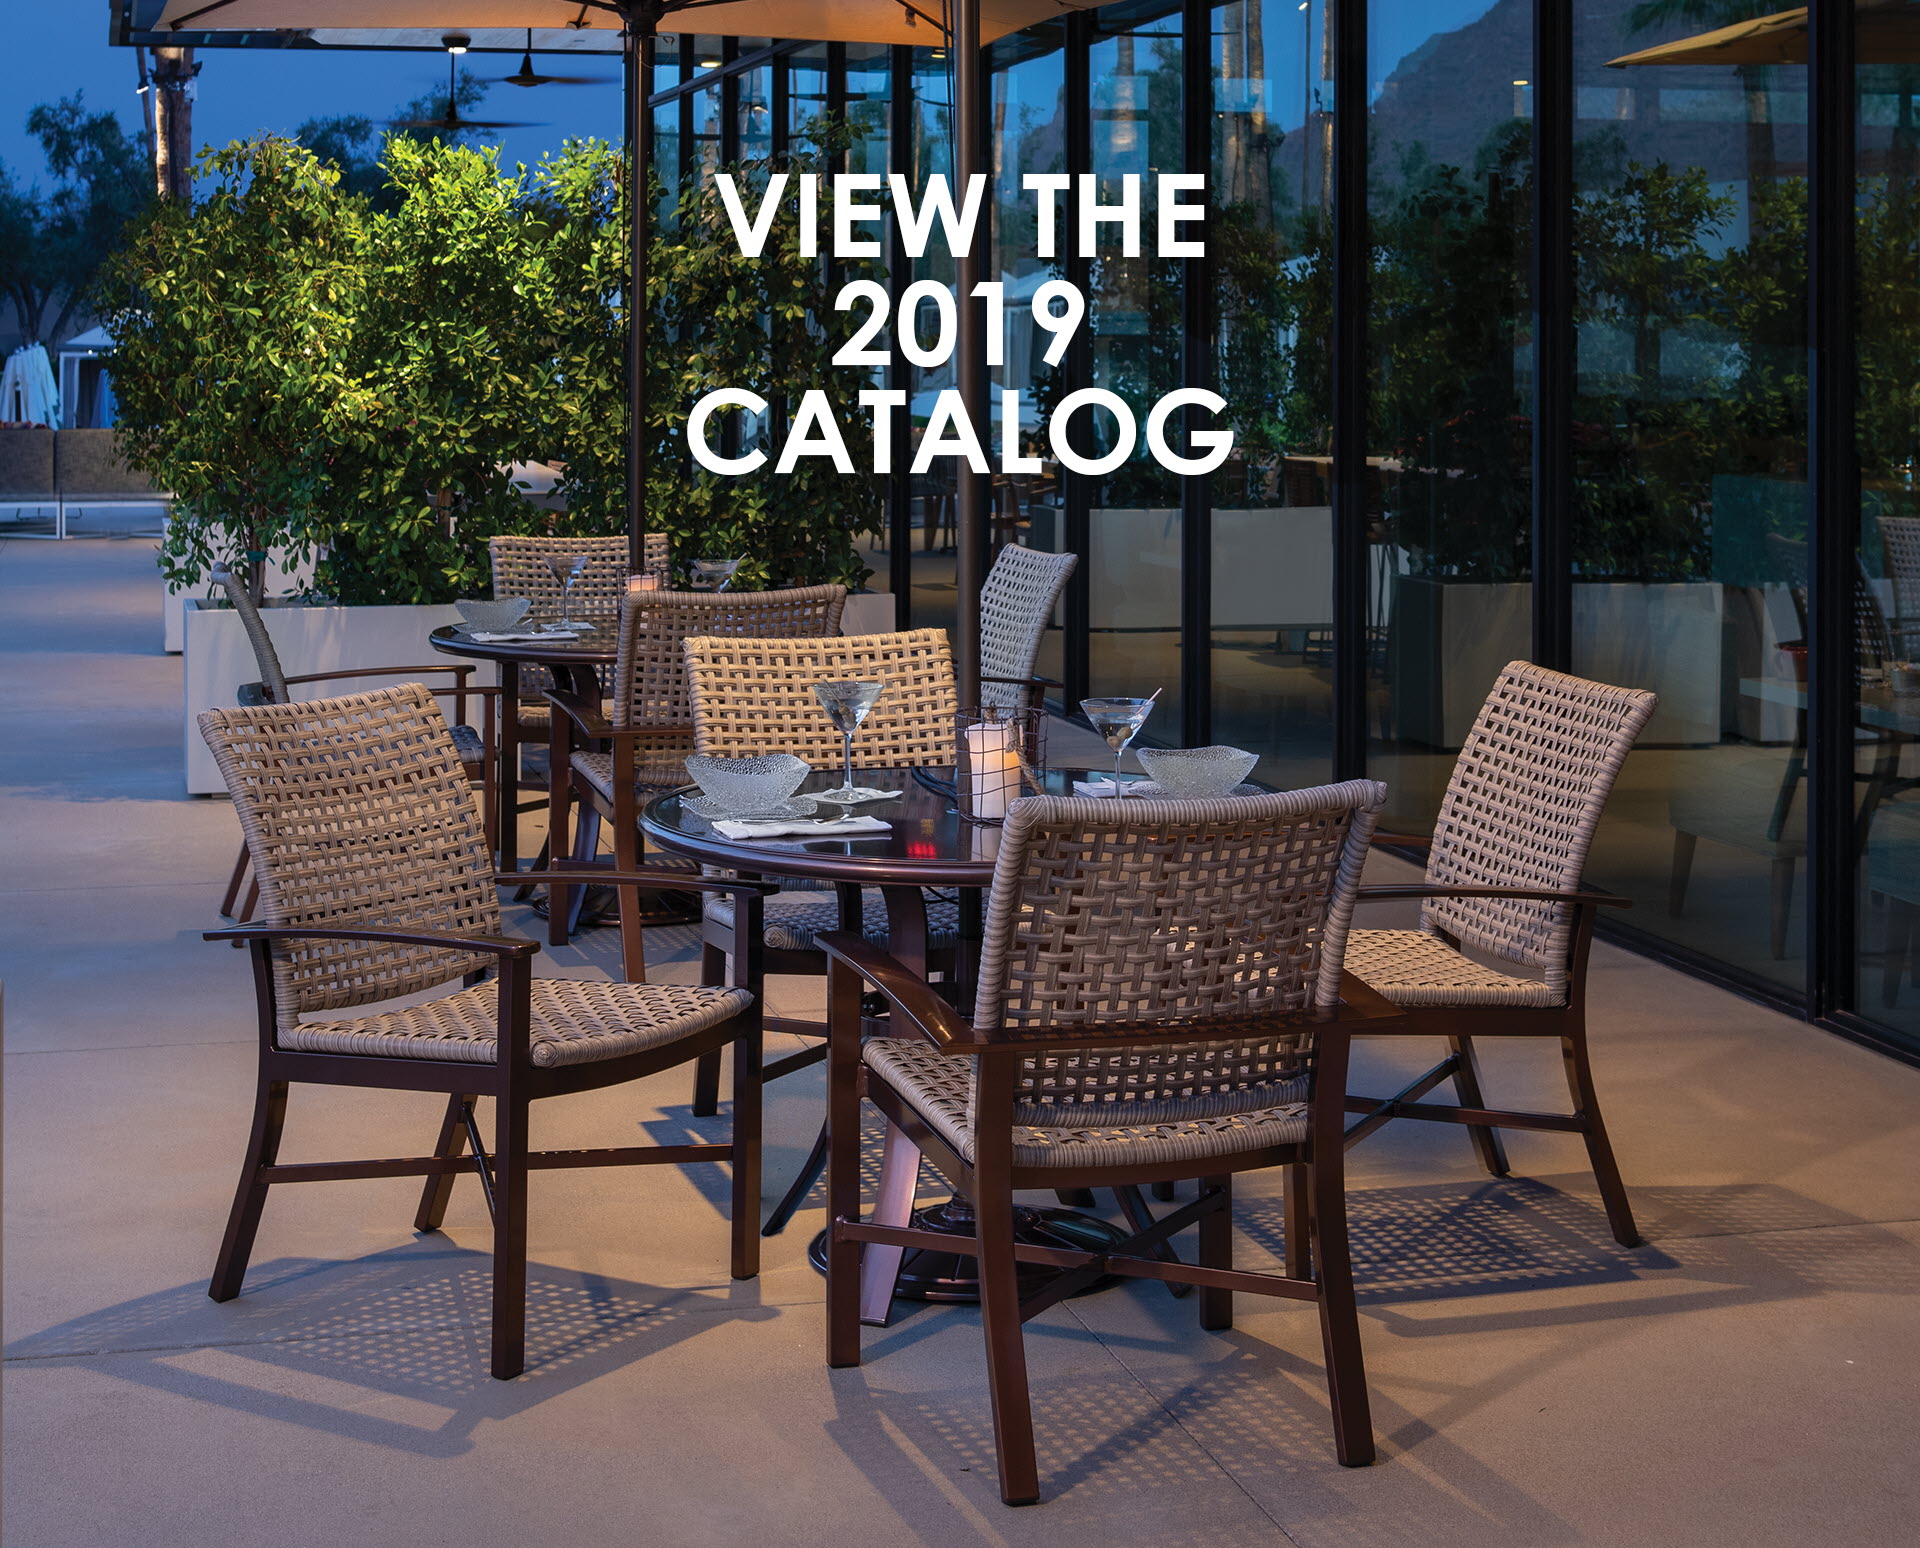 outdoor furniture sets commercial contract texacraft catalog sage green accent tables leader and solutions offer durable high end that can customized meet clear table inch wide